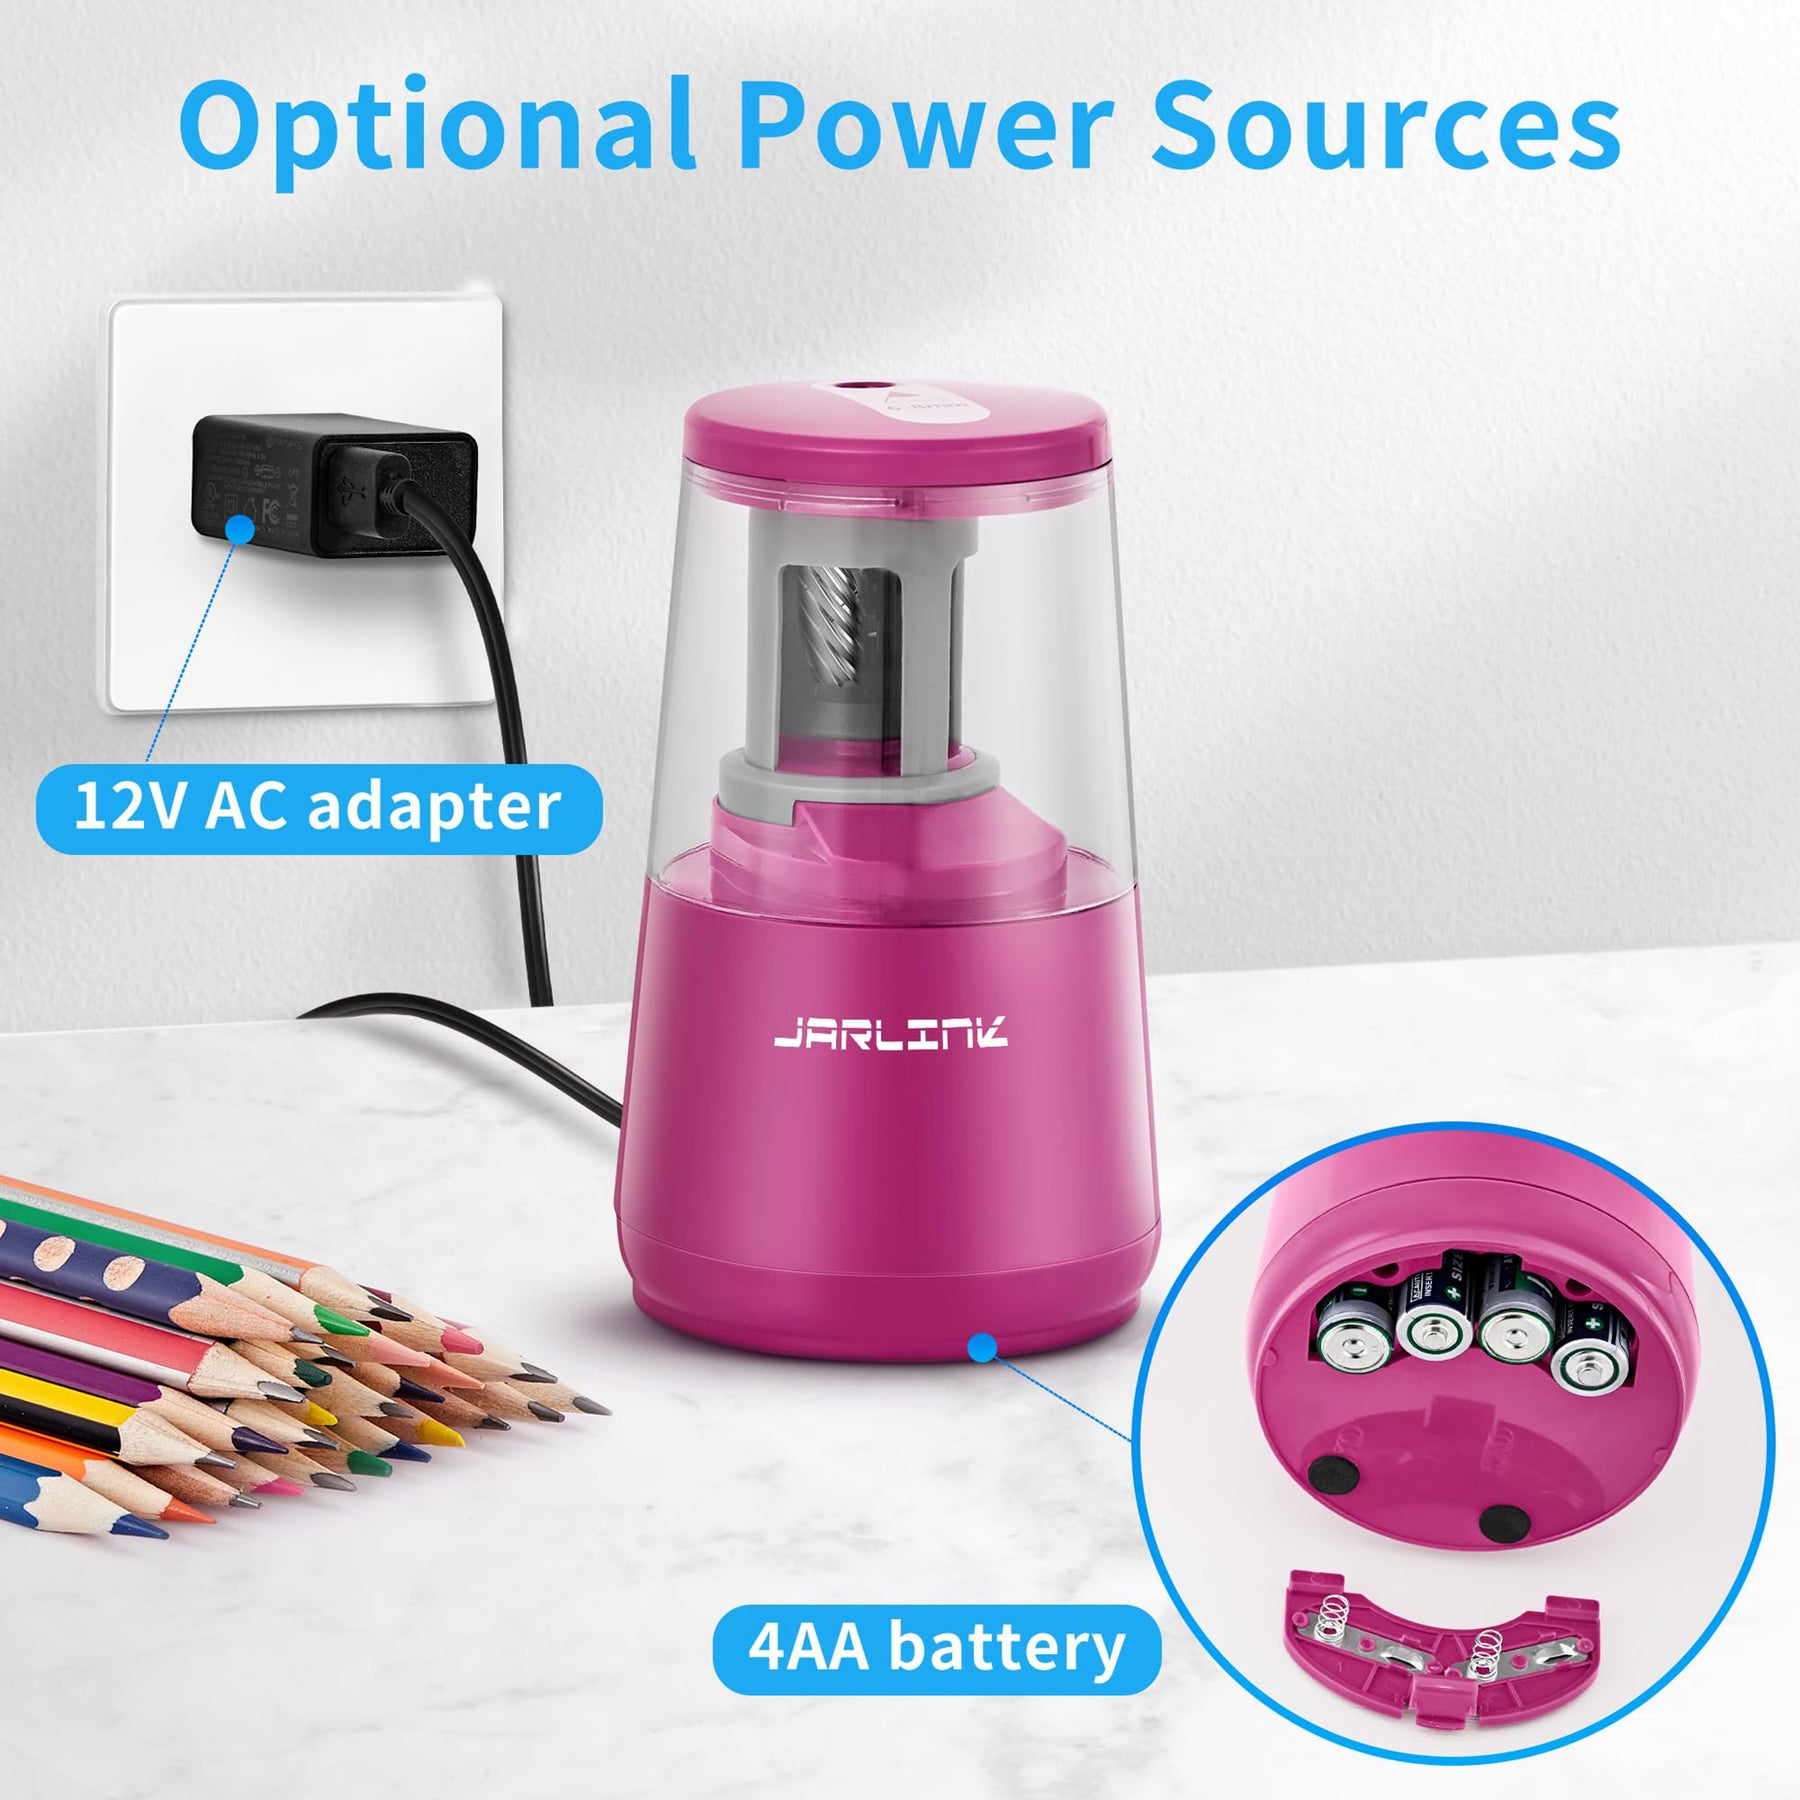 JARLINK Electric Pencil Sharpener, Heavy-duty Helical Blade to Fast Sharpen, Auto Stop for No.2/Colored Pencils(6-8mm), USB/Battery Operated in School Classroom/Office/Home